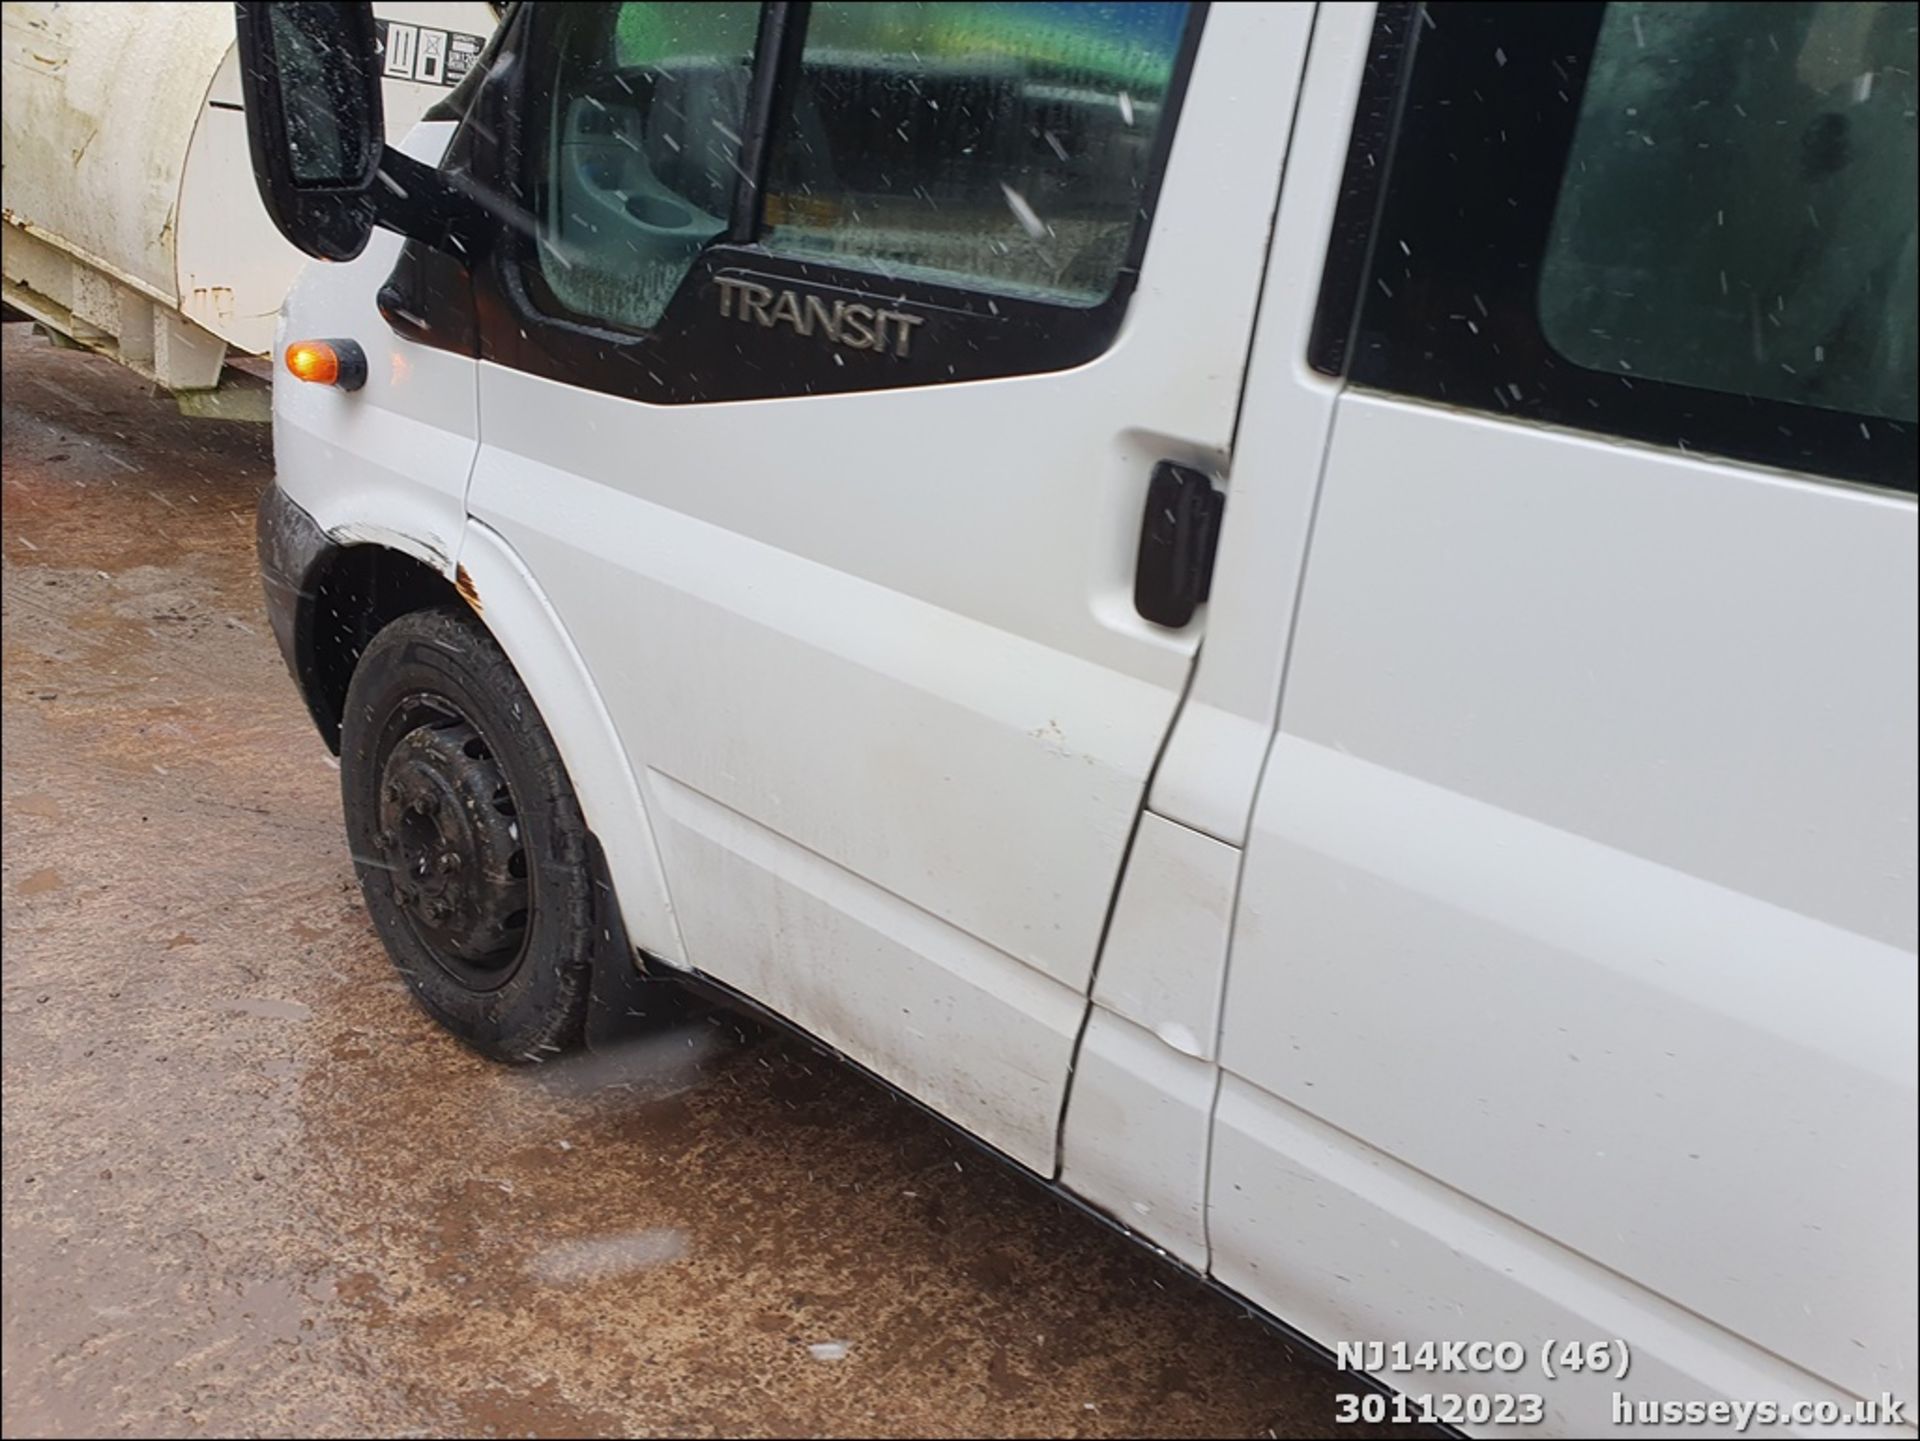 14/14 FORD TRANSIT 100 T350 RWD - 2198cc 4dr Tipper (White, 75k) - Image 47 of 51